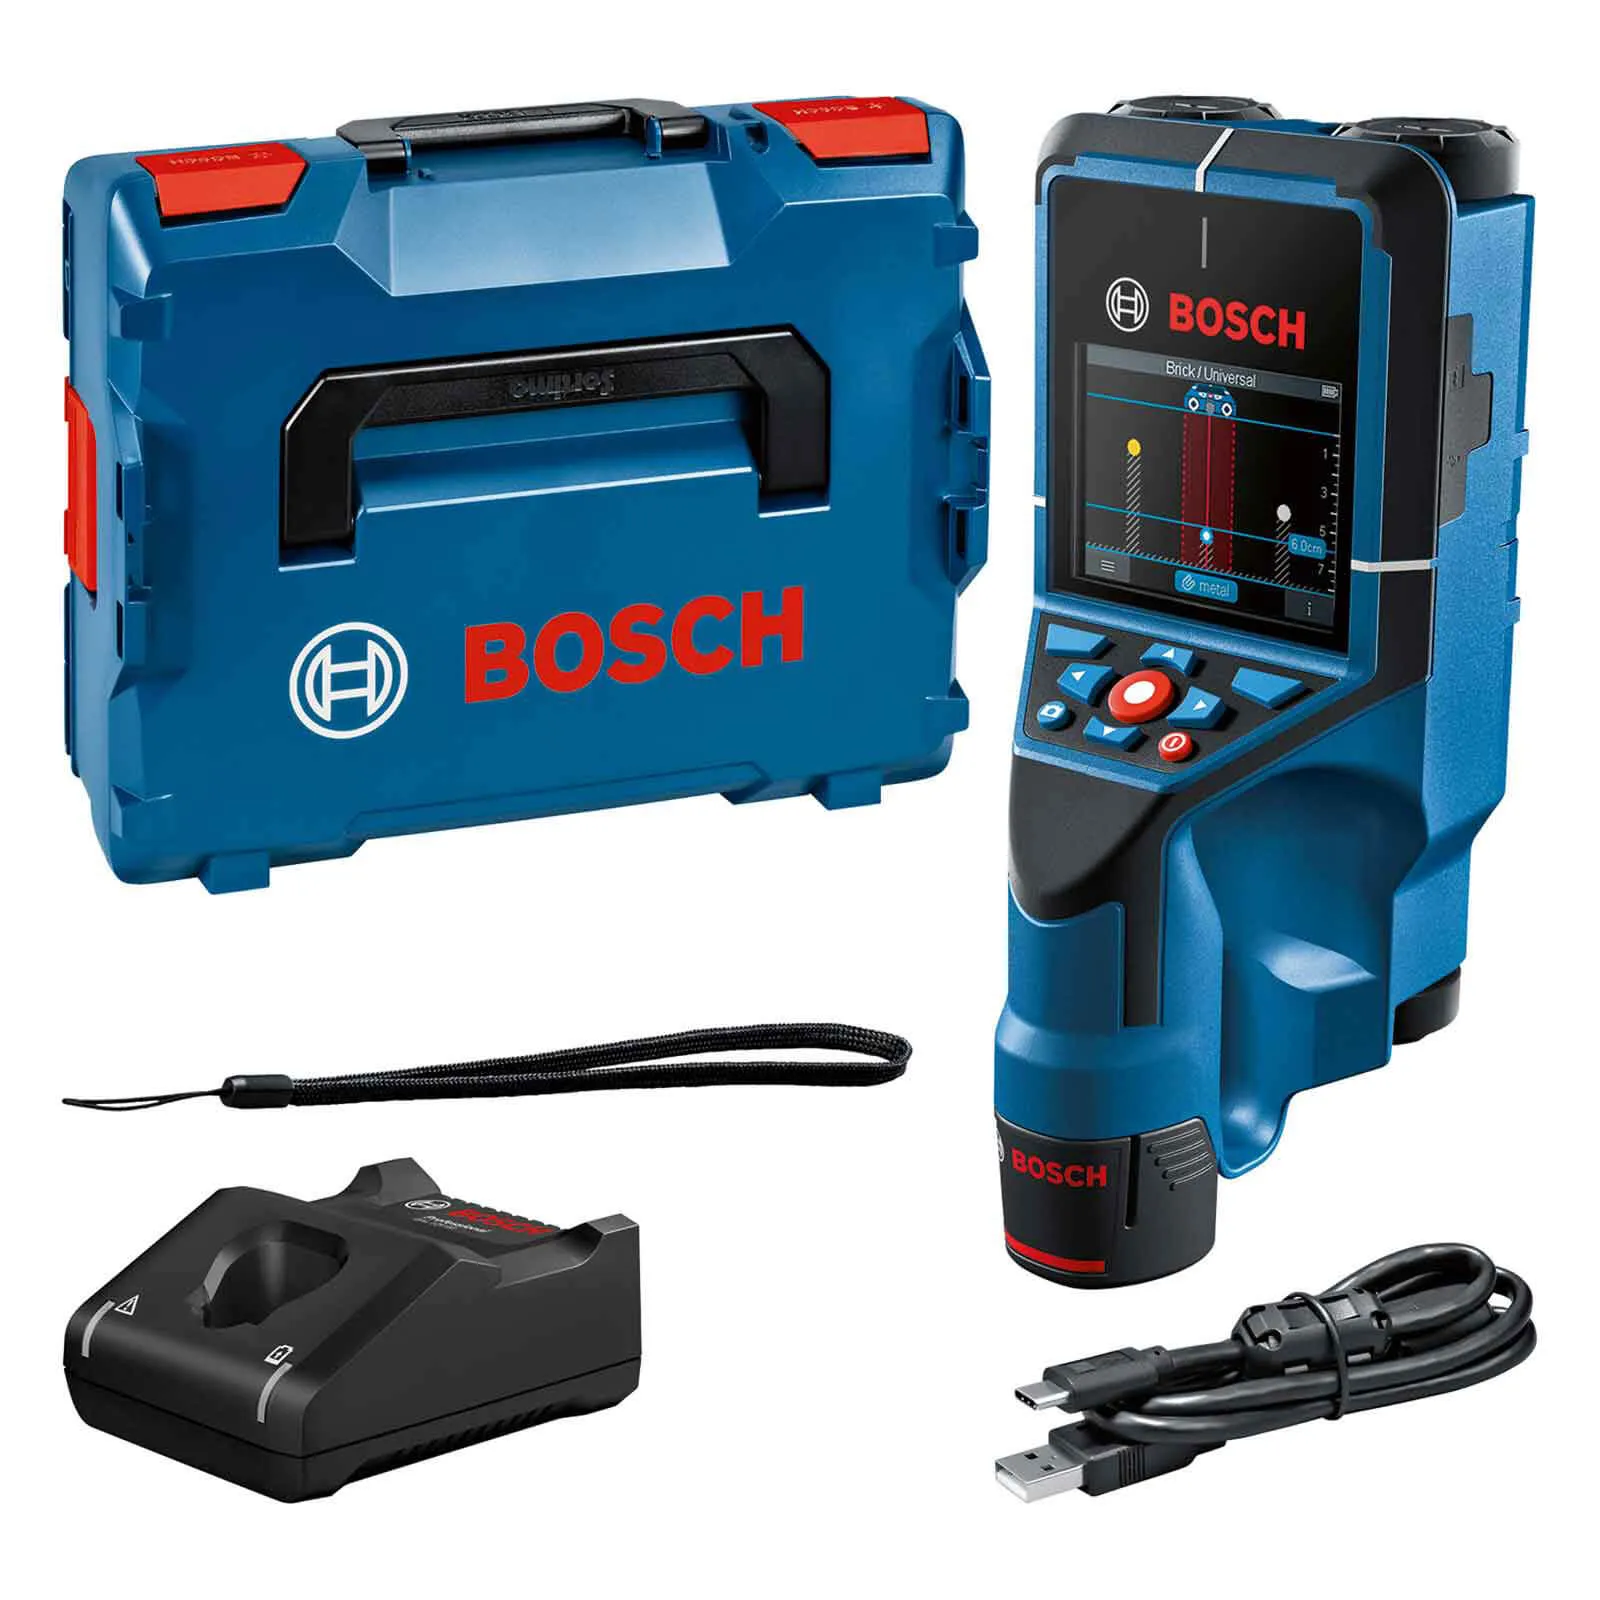 Bosch D-Tect 200 C 12v Professional Cordless Wall Scanner Detector - 1 x 2ah Li-ion, Charger, Case